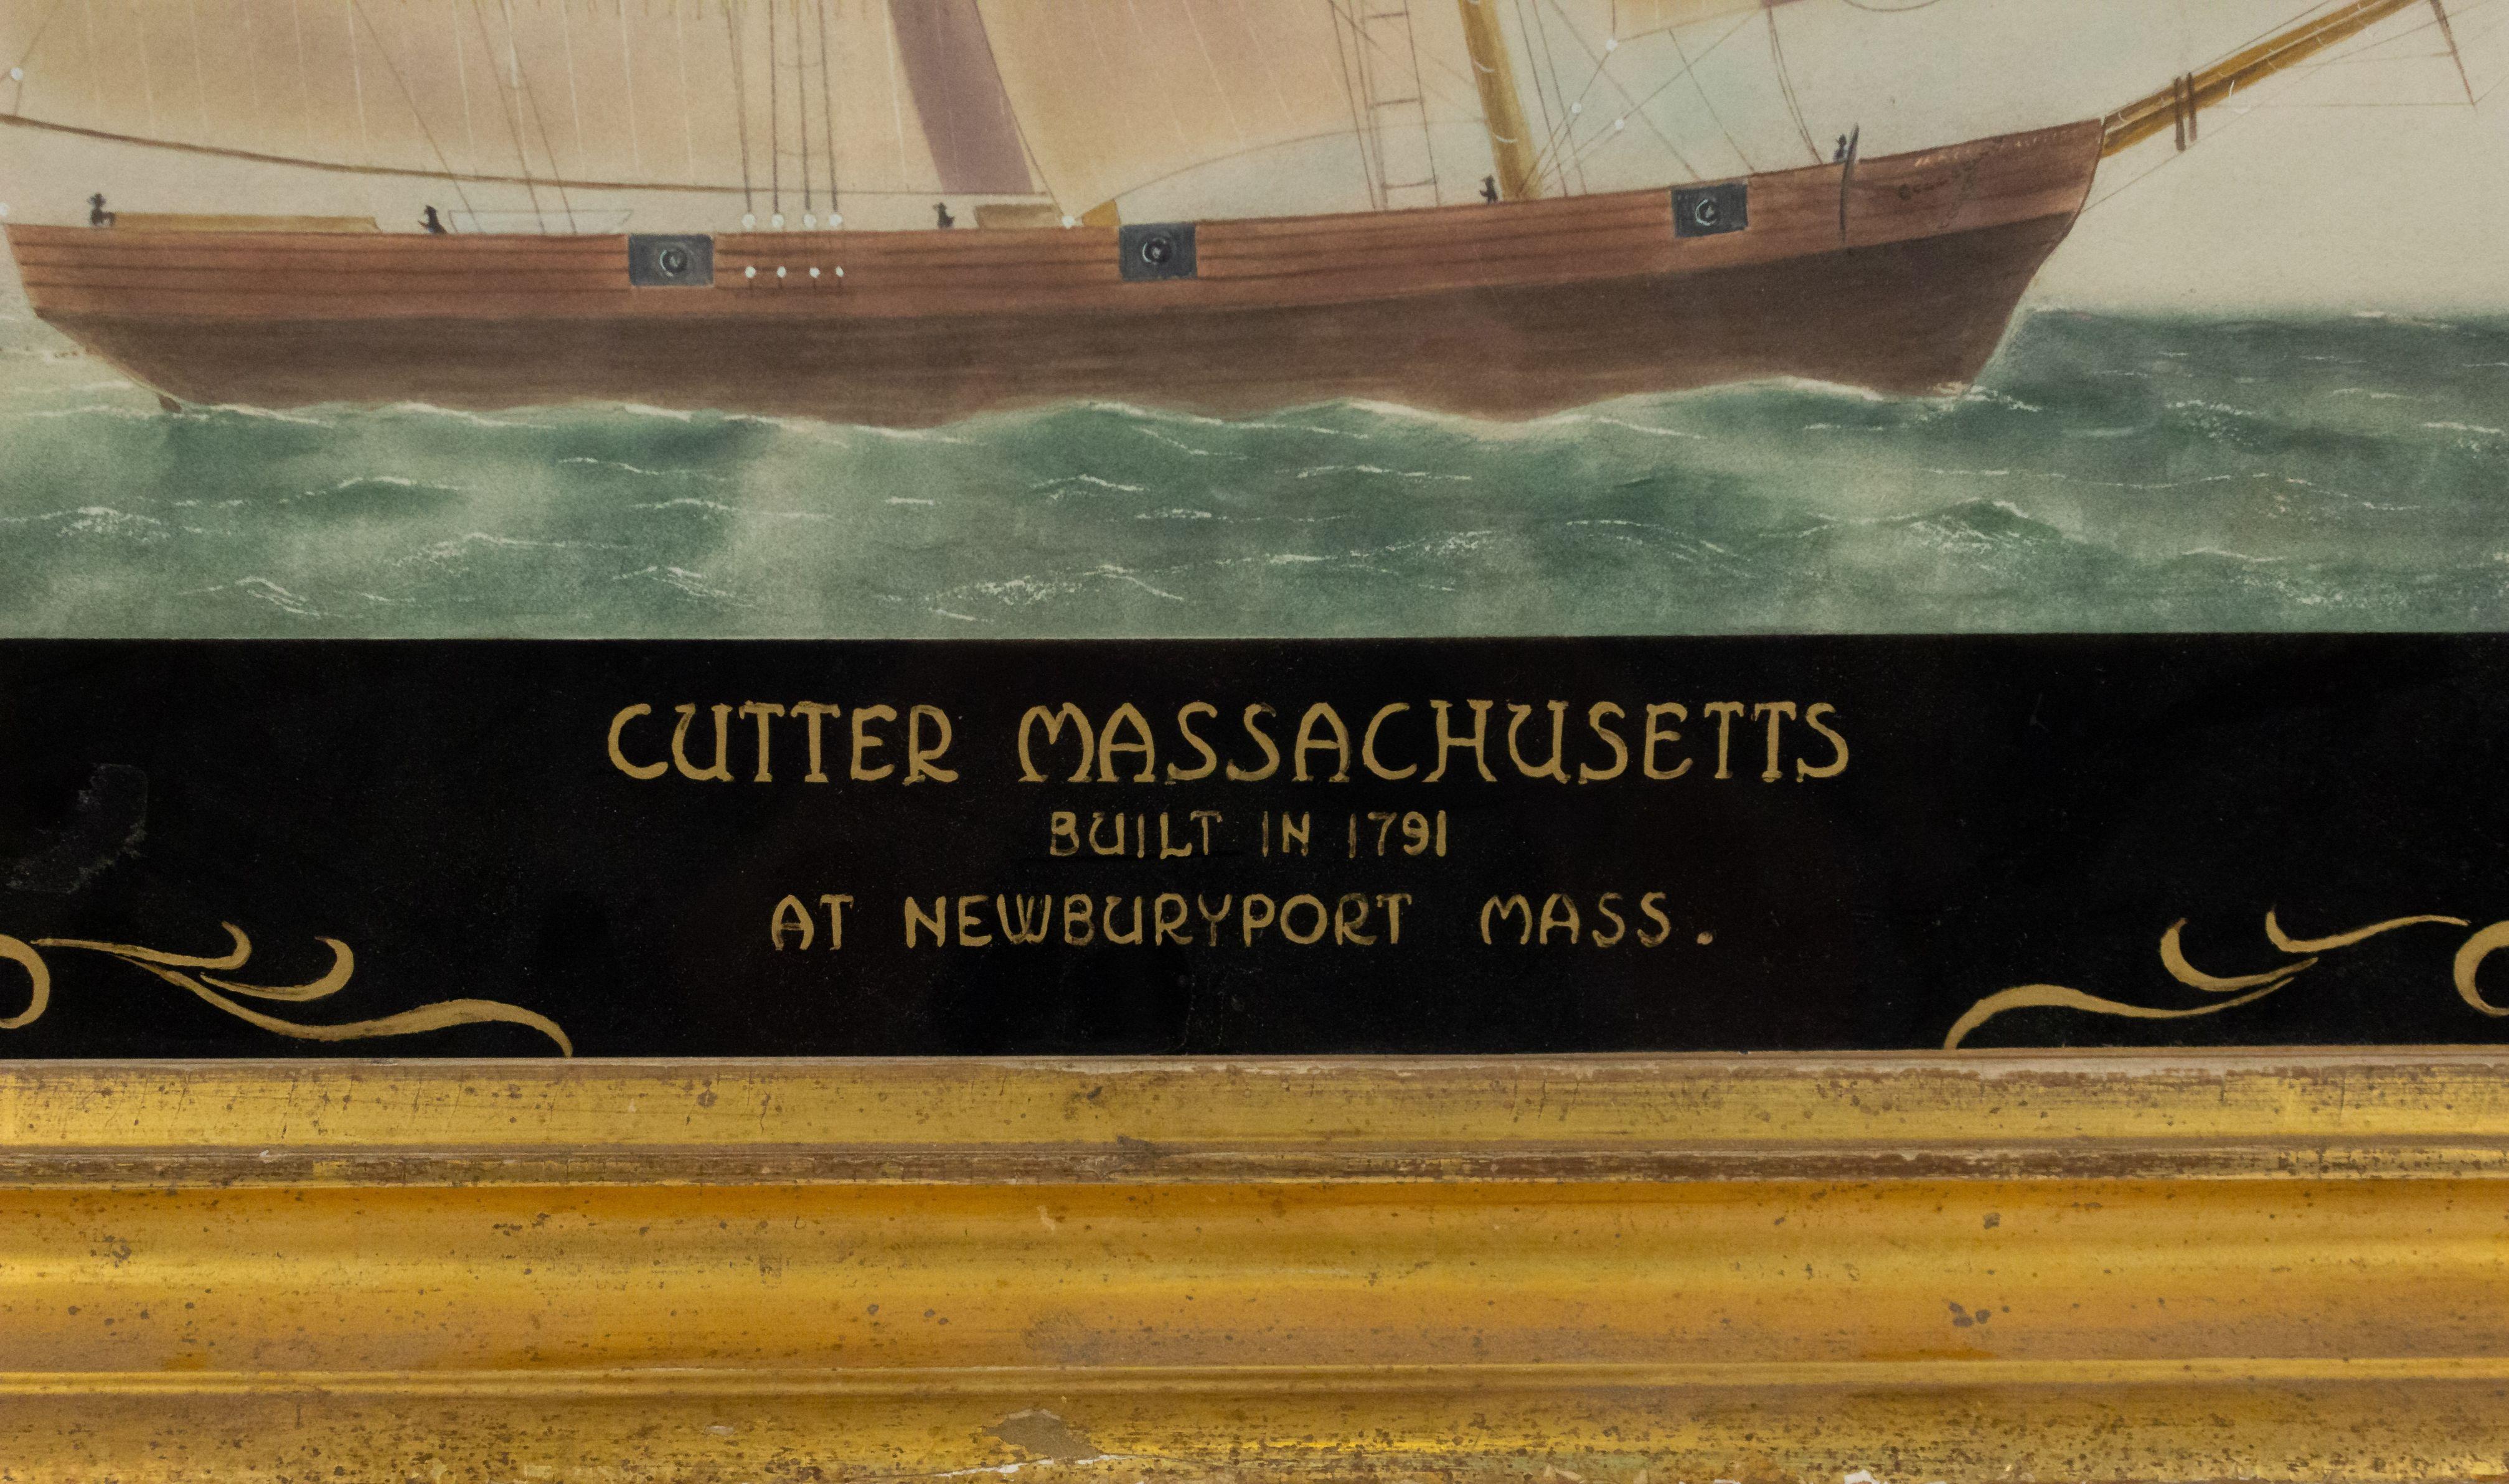 19th century nautical watercolor painting depicting the Cutter Massachusetts built at Newbury port in the Commonwealth of Massachusetts in the year 1791. Watercolor seascape with reverse painted and gilt glass border with scrolling decoration and